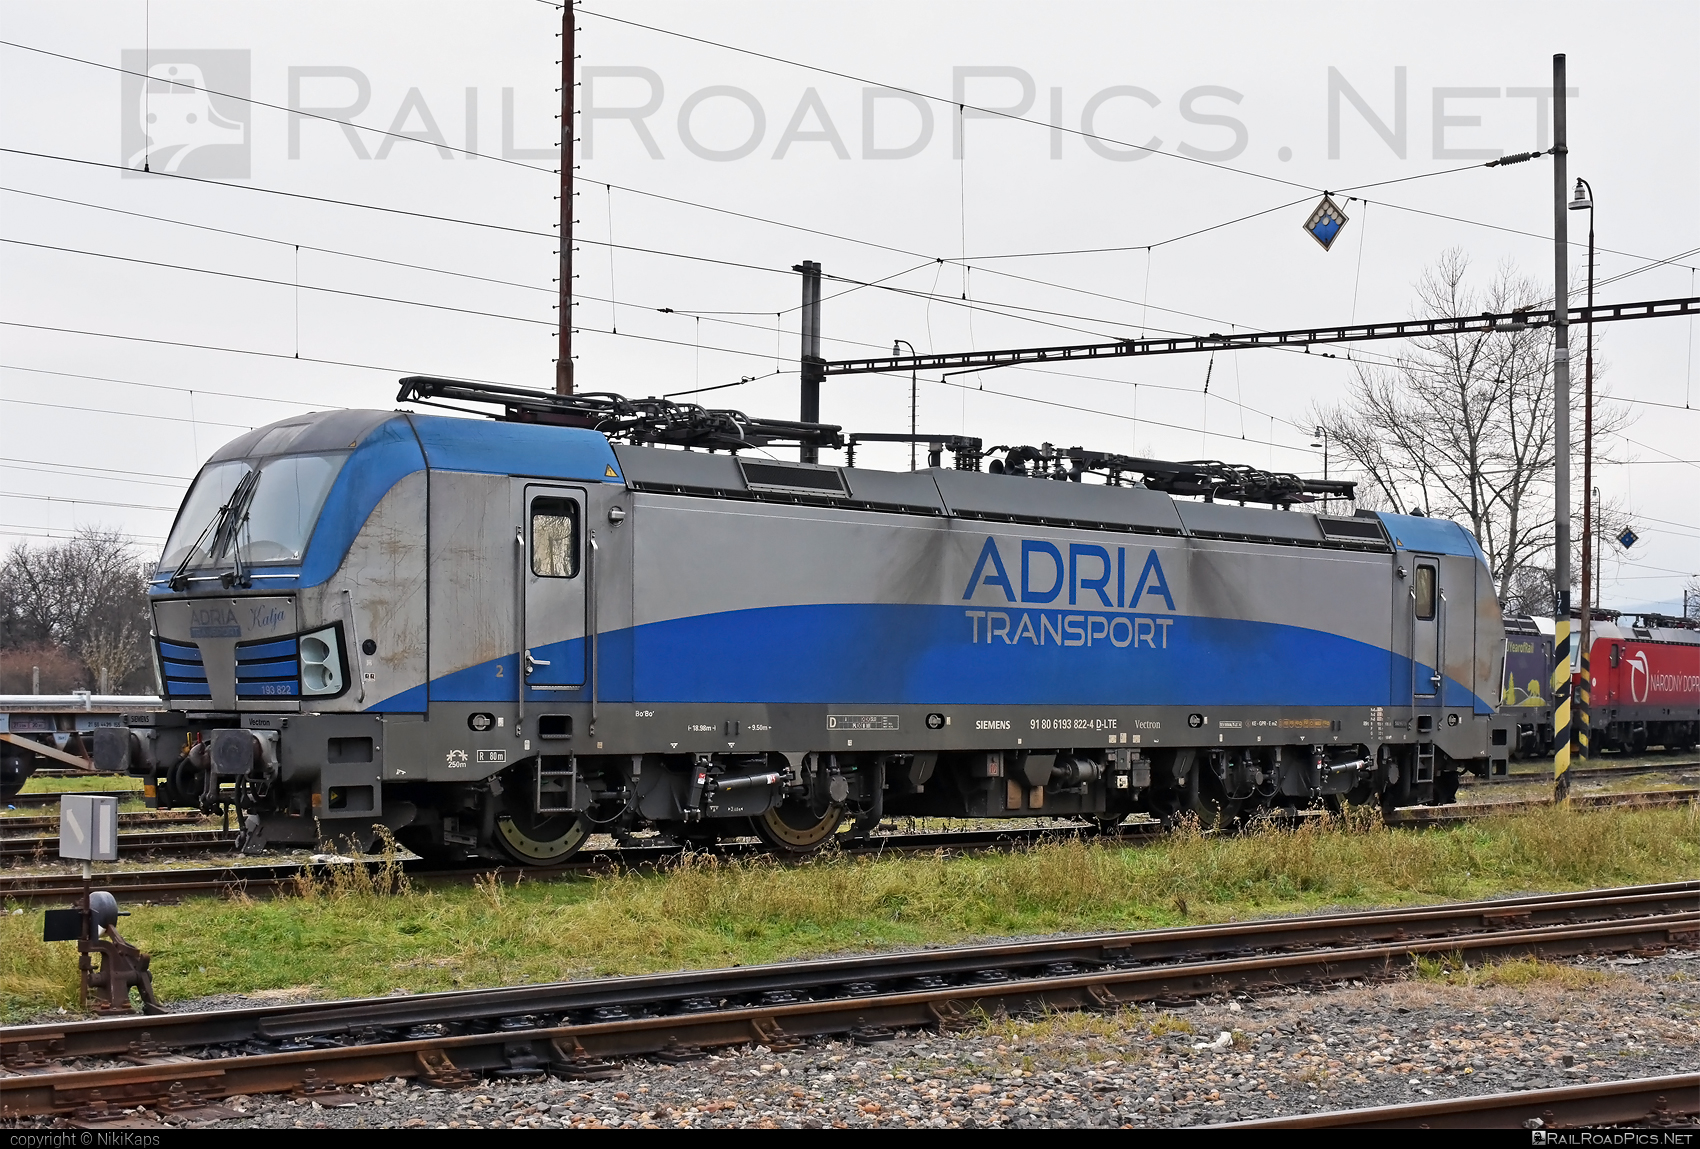 Siemens Vectron MS - 193 822 operated by Adria Transport D.O.O. #adria #adriatransport #lte #ltelogistikundtransport #ltelogistikundtransportgmbh #siemens #siemensVectron #siemensVectronMS #vectron #vectronMS